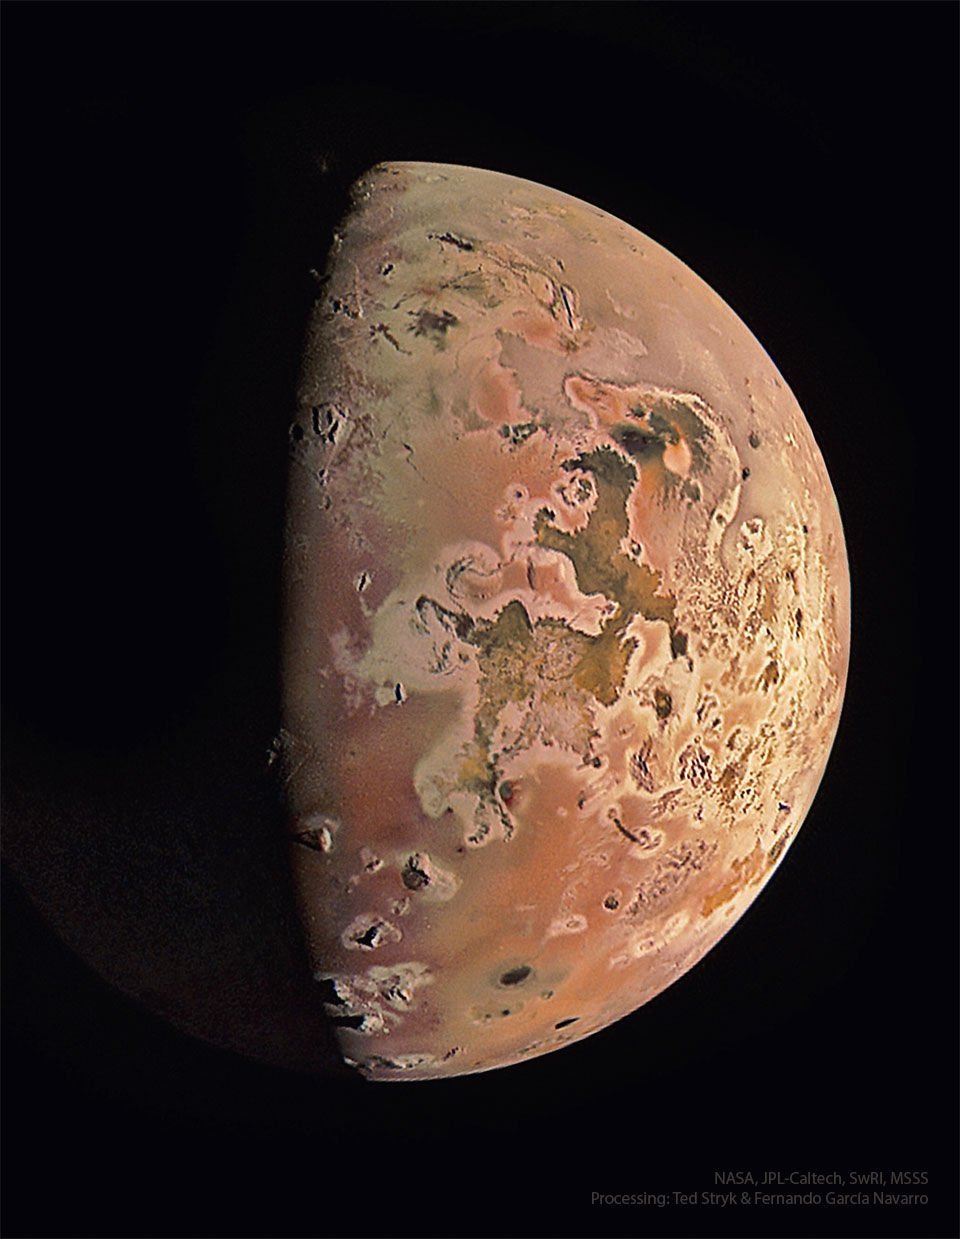 Jupiter's moon Io is shown as photogaphred recently
by NASA's passing Juno spacecraft. The moon is nearly half-
lit by the distant Sun and shows a complex surface including
the colors yellow, orange, and dark brown. Near the top, the
plume of an active volcano can be seen.
Więcej szczegółowych informacji w opisie poniżej.